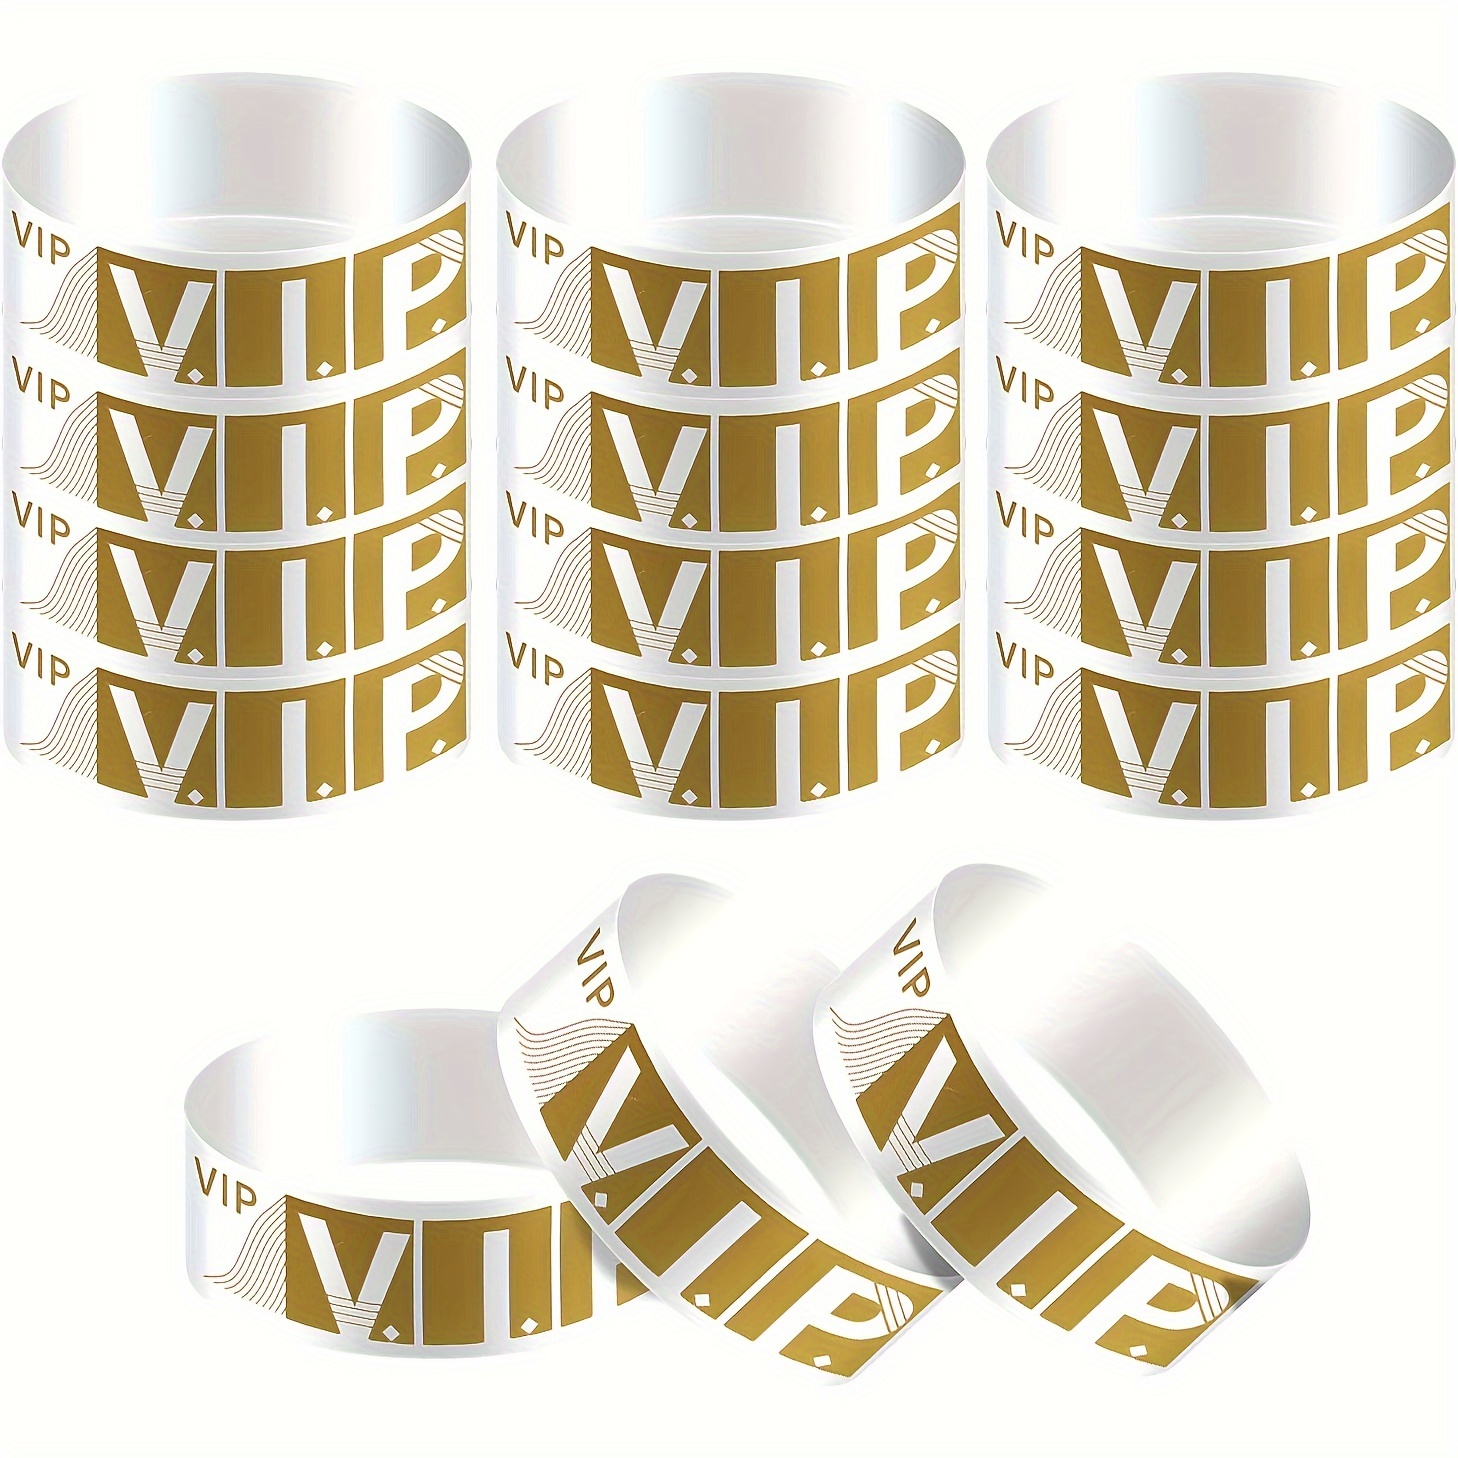 

Vip Wristbands, Party Wristbands Wristbands Armbands For Events Vip Bracelets For Events For Wedding Party Events Concerts Fairs Festivals Supplies